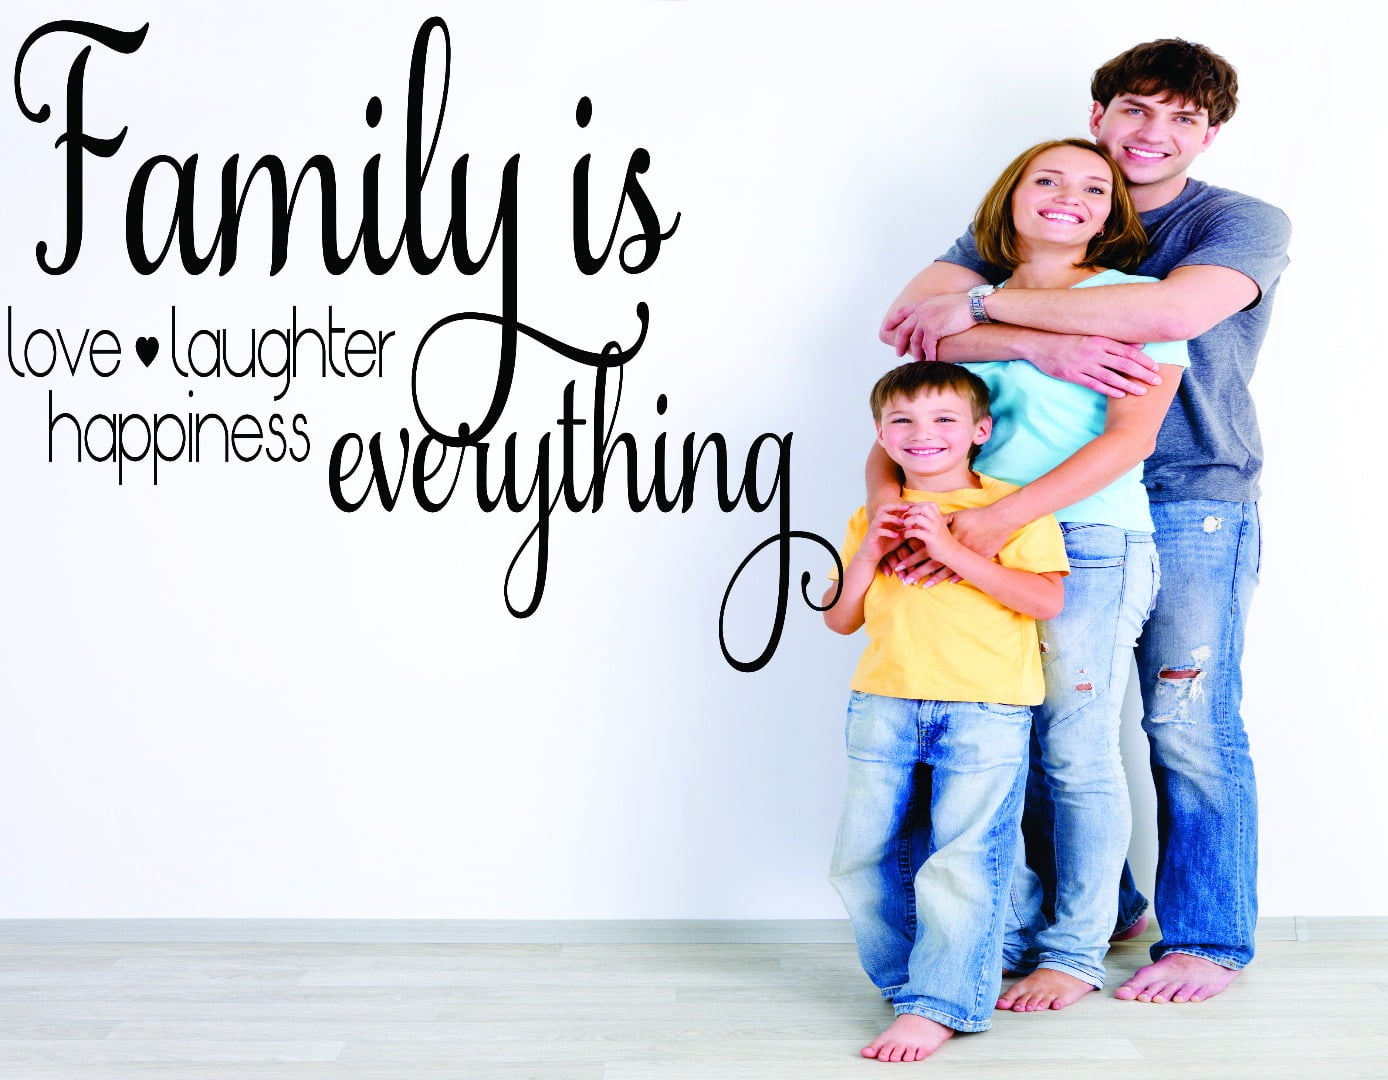 Happy laughter of children and Joy in every Family quotes.